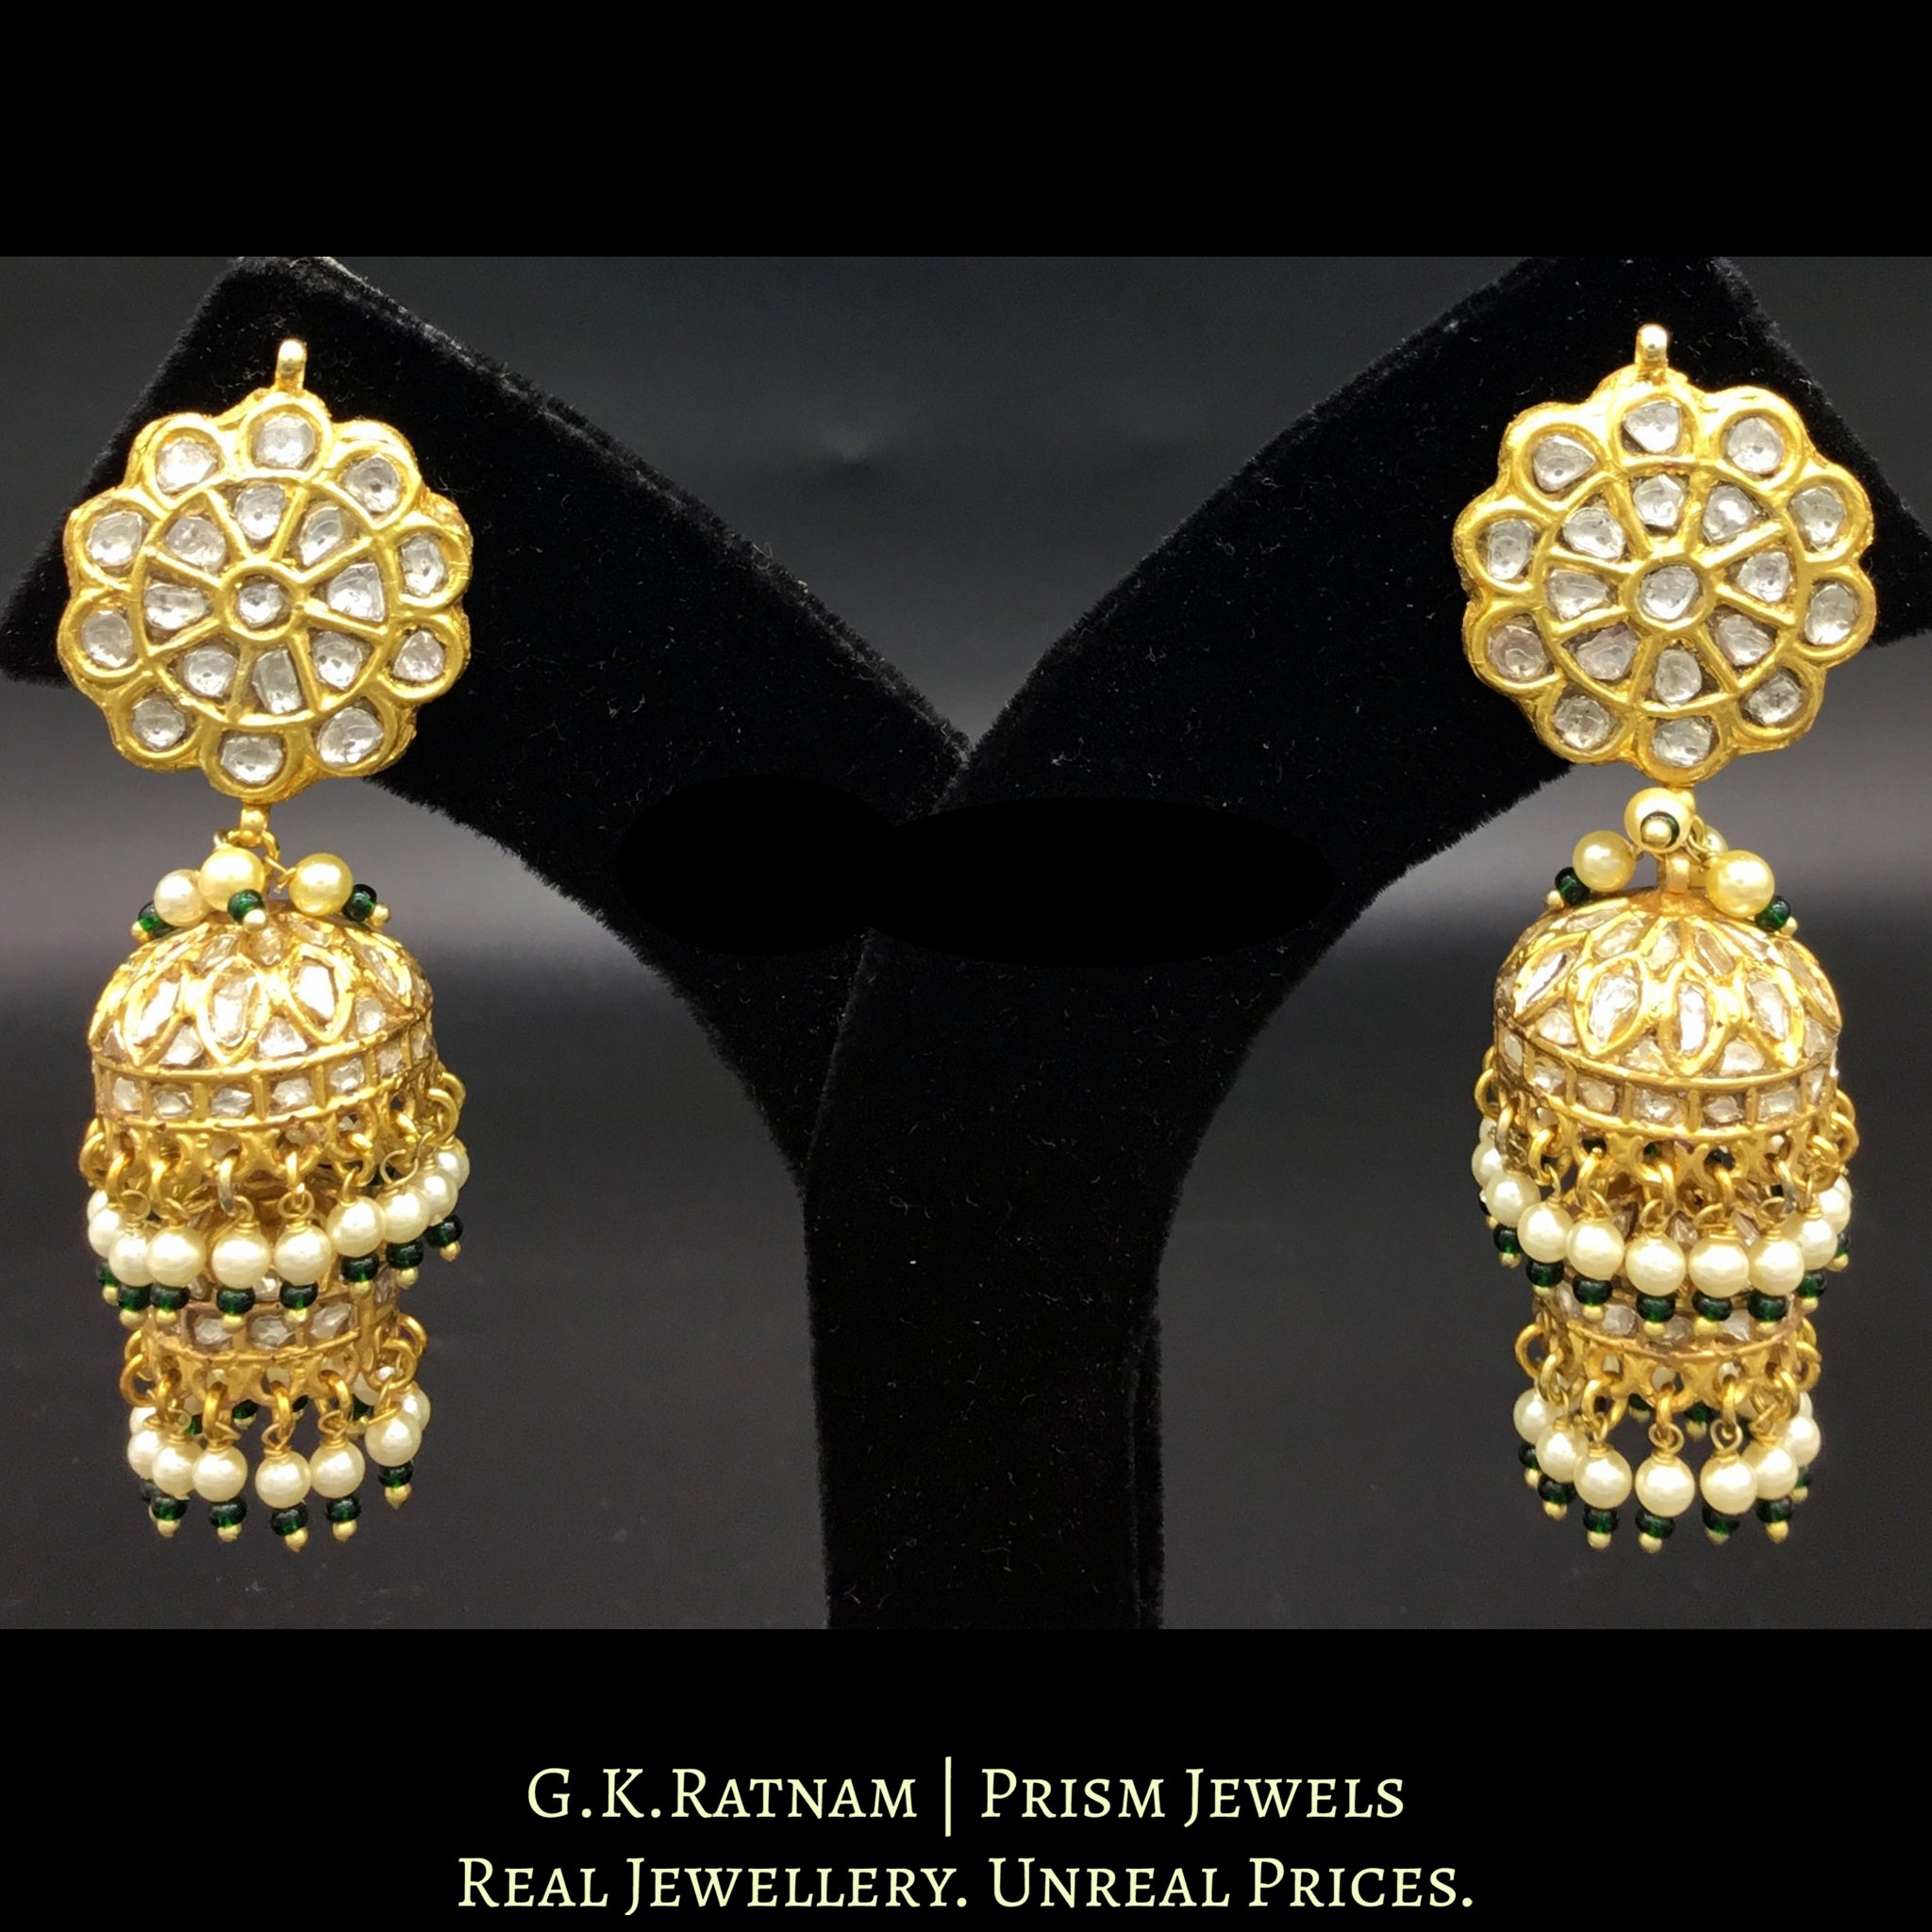 23k Gold and Diamond Polki two-tier Jhumki Earring Pair with pearls and a hint of green